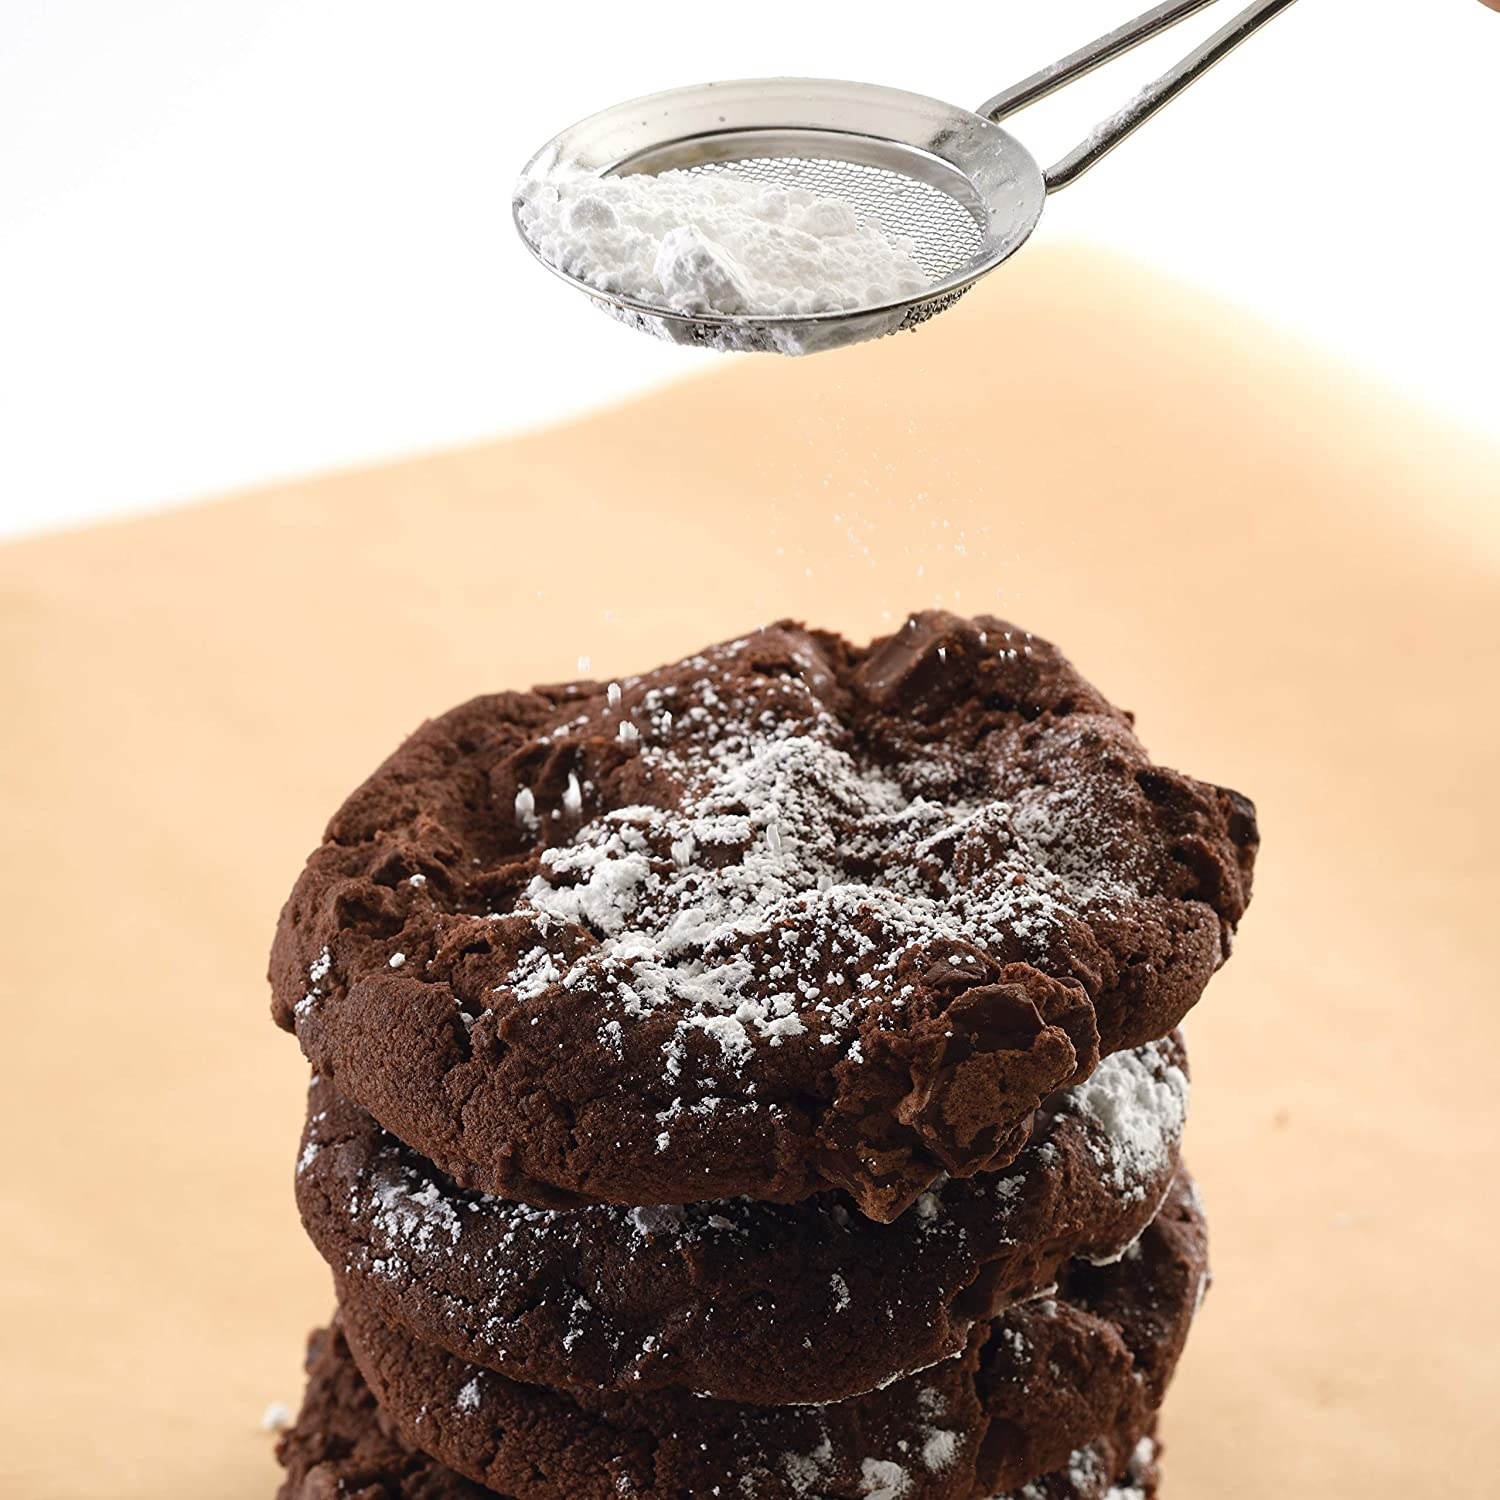 Powdered sugar is being sifted onto cookies from a sifter